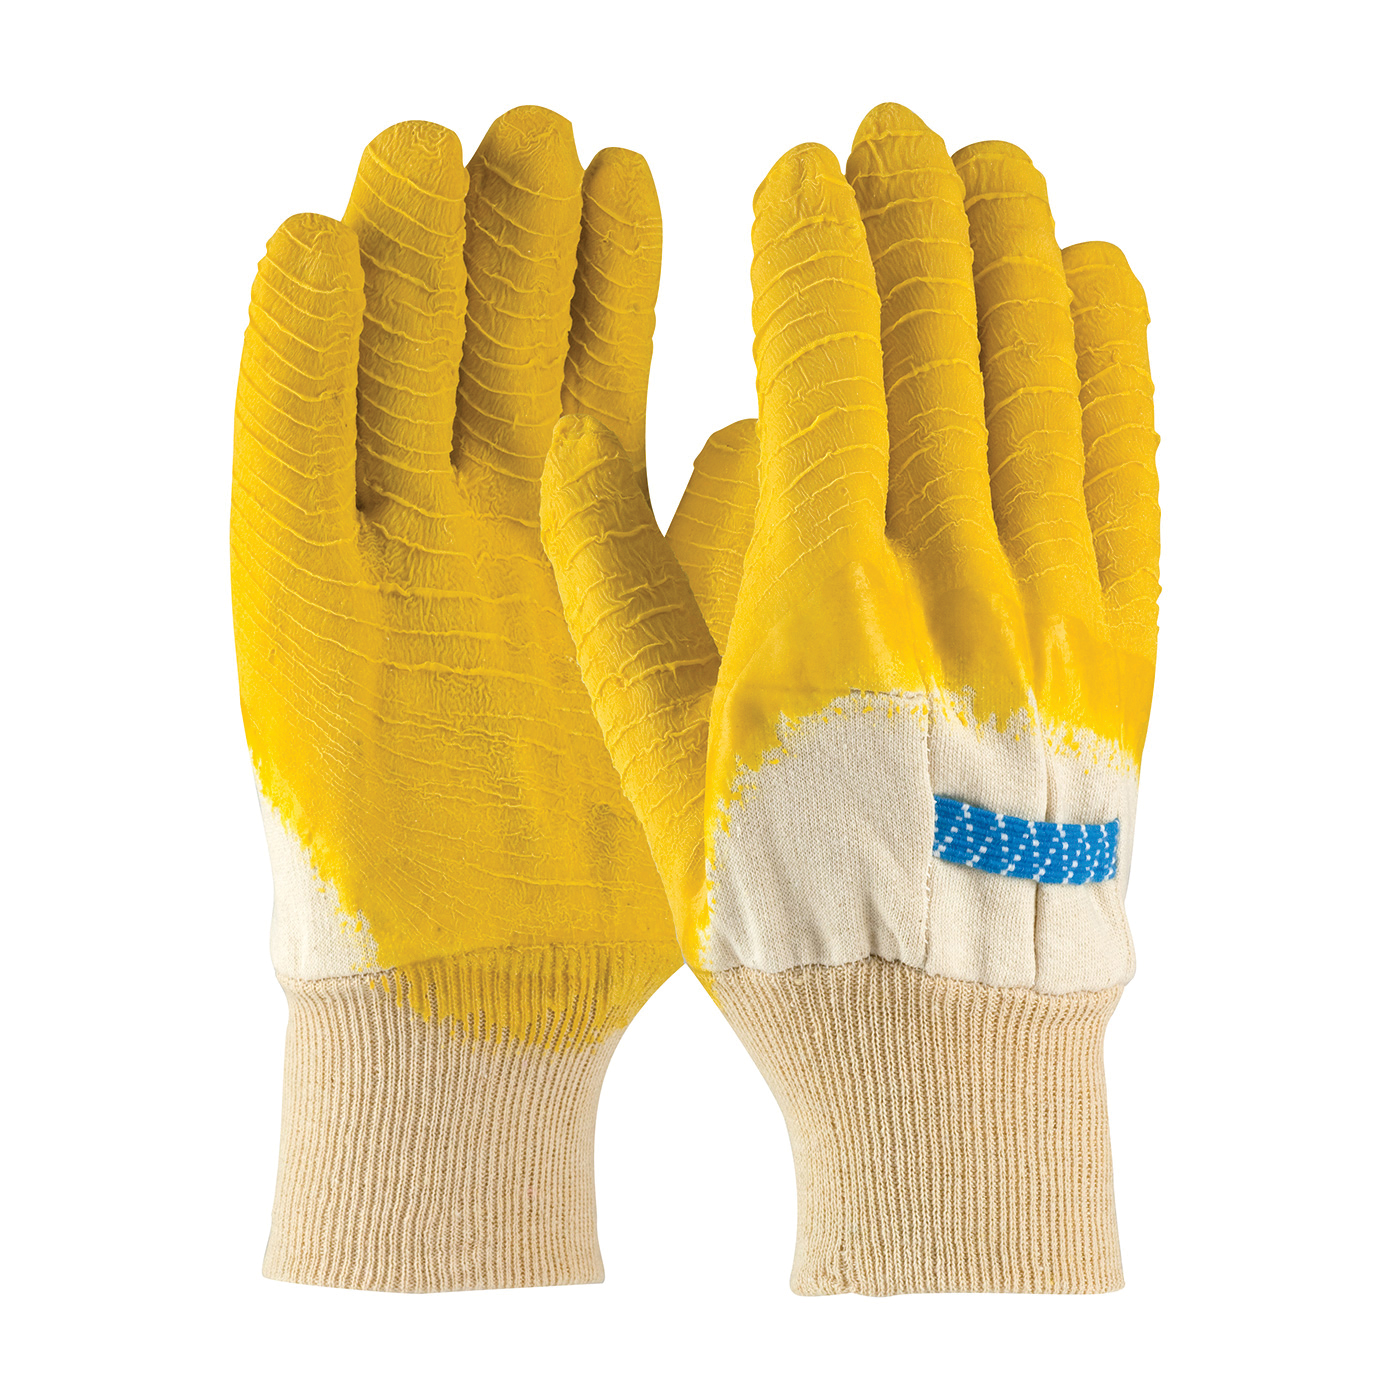 PIP® Armor® 55-3271 Men's General Purpose Gloves, Fabric/Work, Clute Cut/Straight Thumb Style, L, Cotton/Natural Rubber Latex Palm, Cotton/Natural Rubber Latex, White/Yellow, Knit Wrist Cuff, Latex Coating, Resists: Abrasion, Jersey Lining